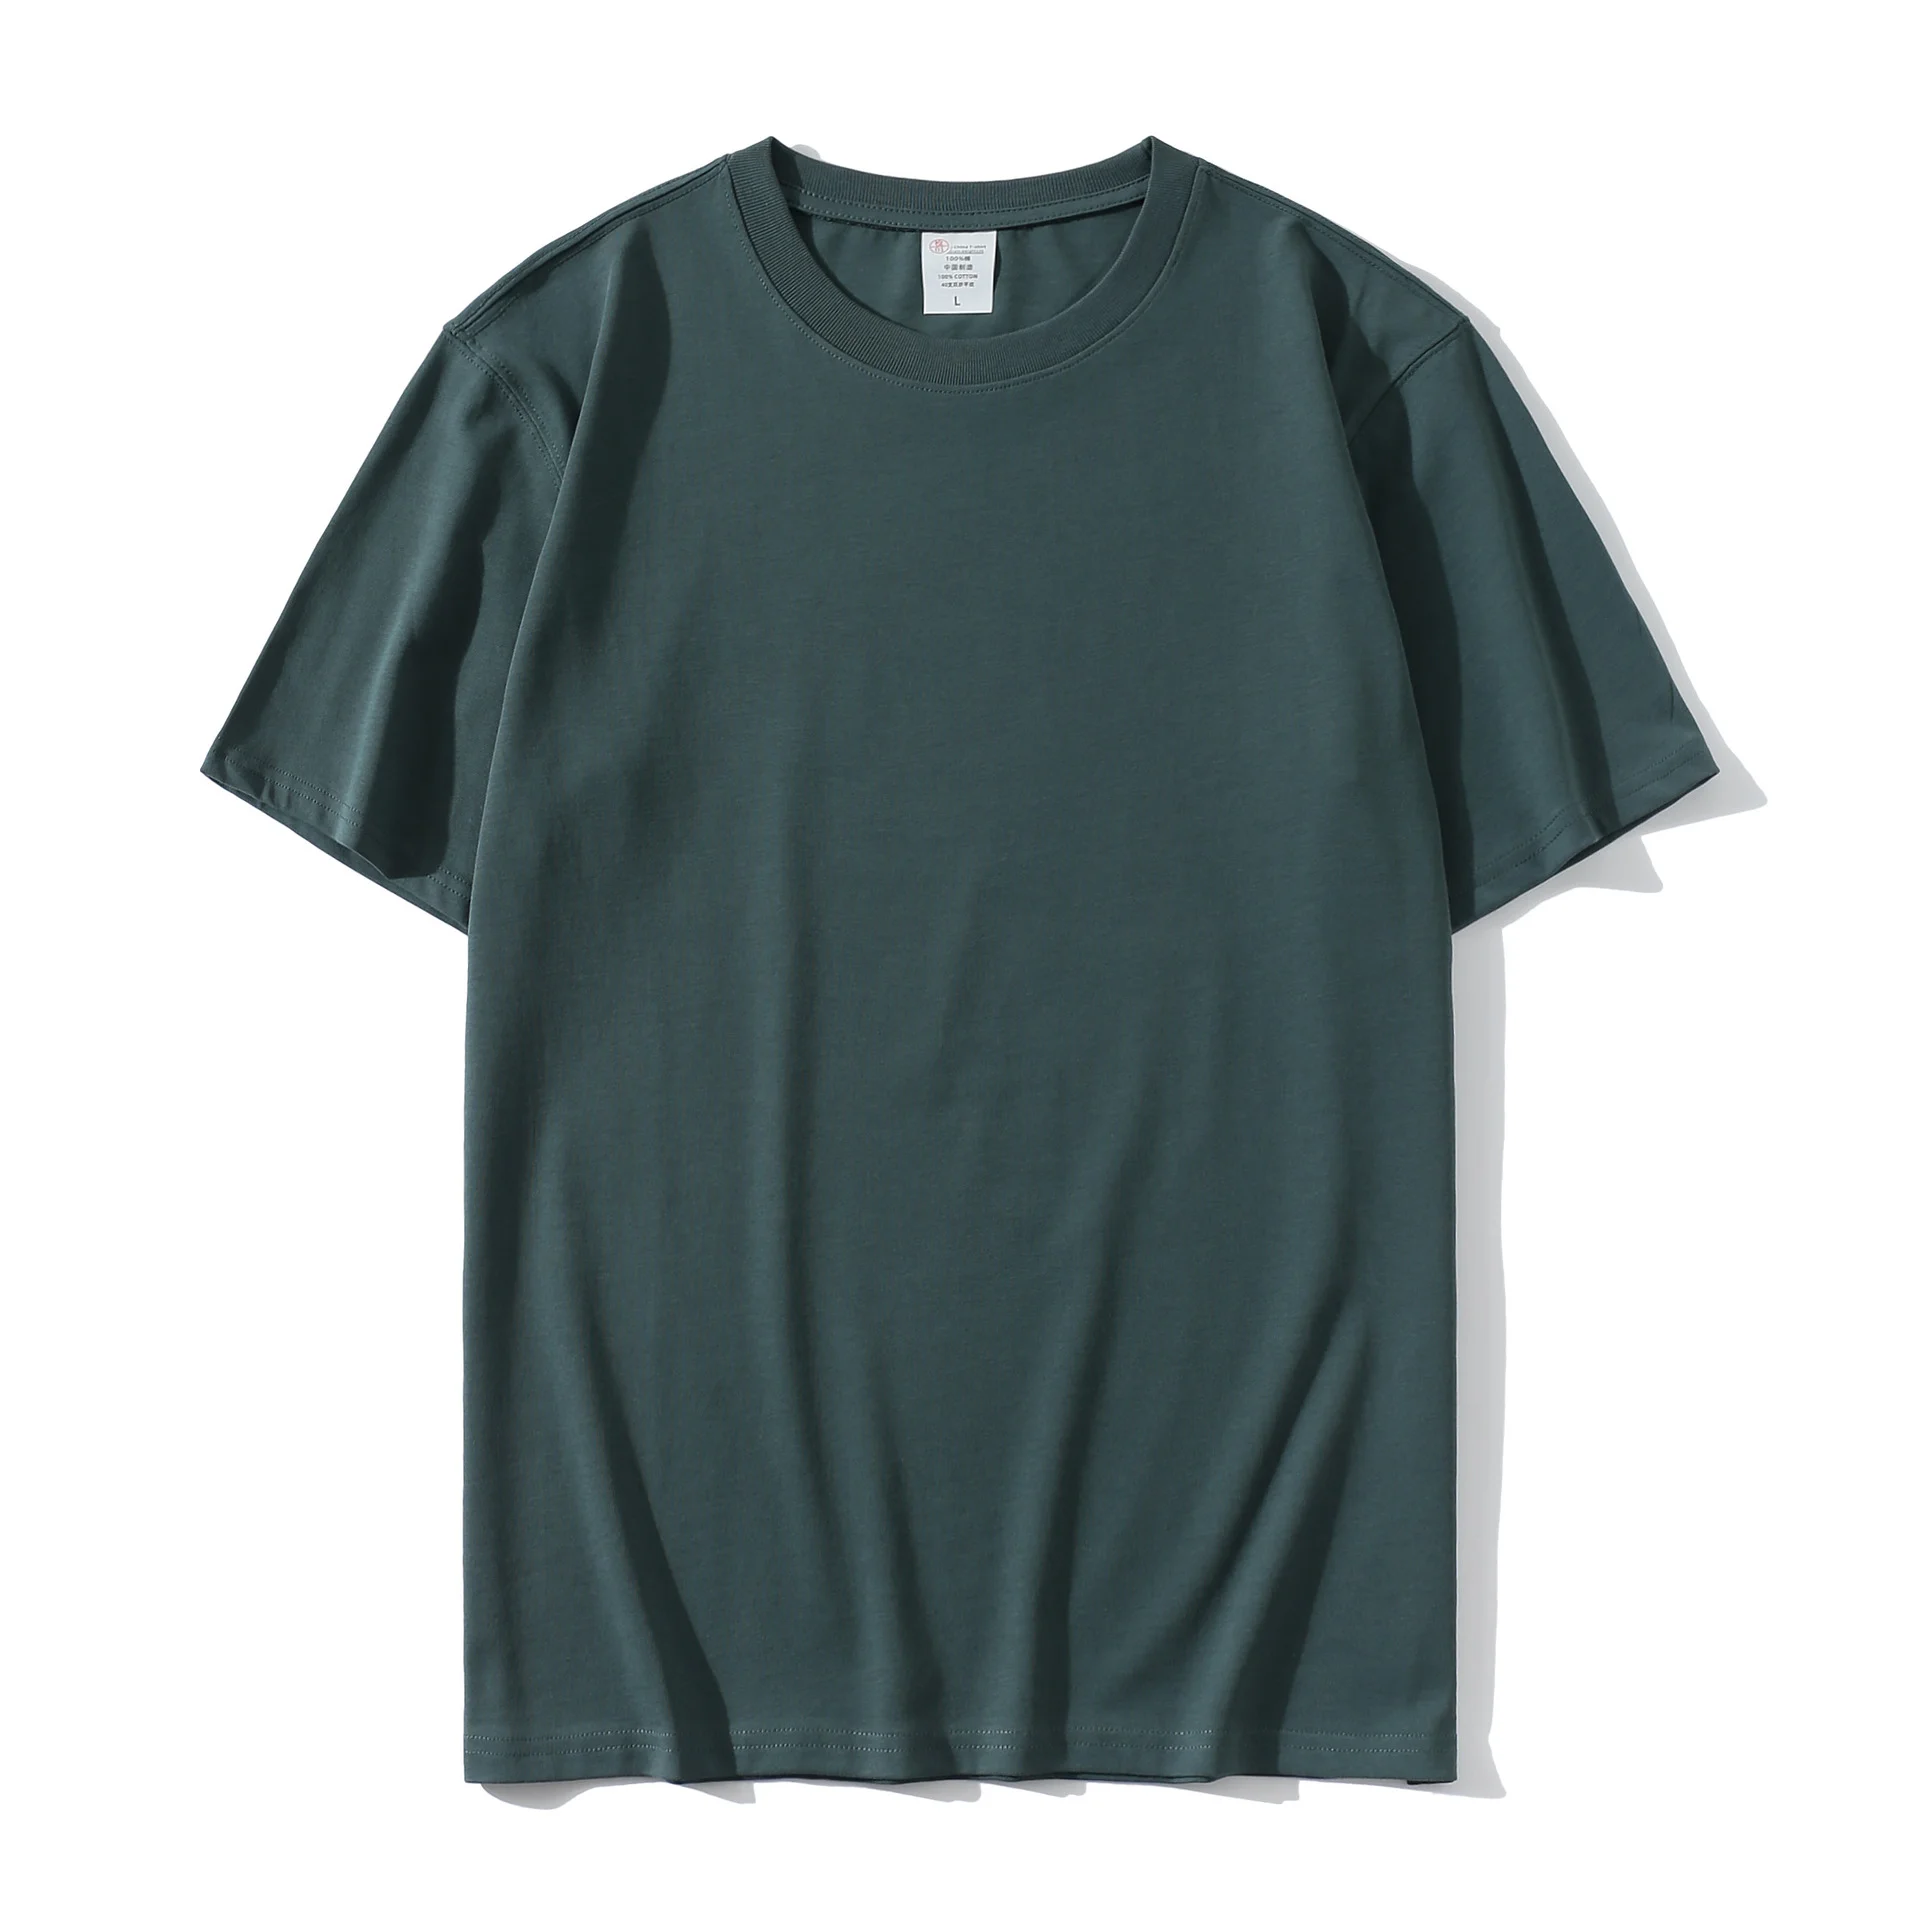 Wholesale Blank T shirts for Printing in Mackay